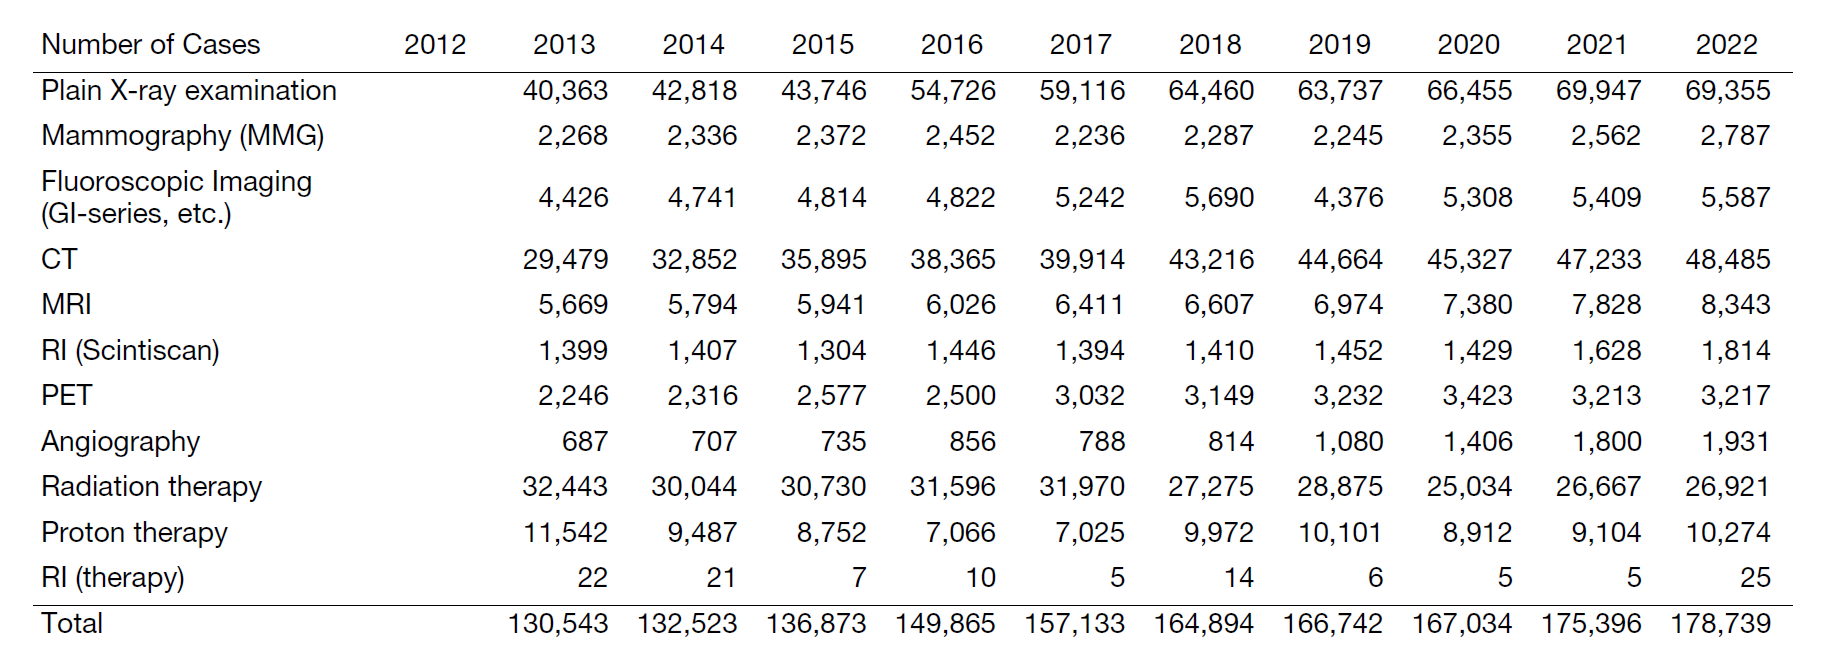 Table 1. Transitions in number of radiological examinations and radiation therapies by year.